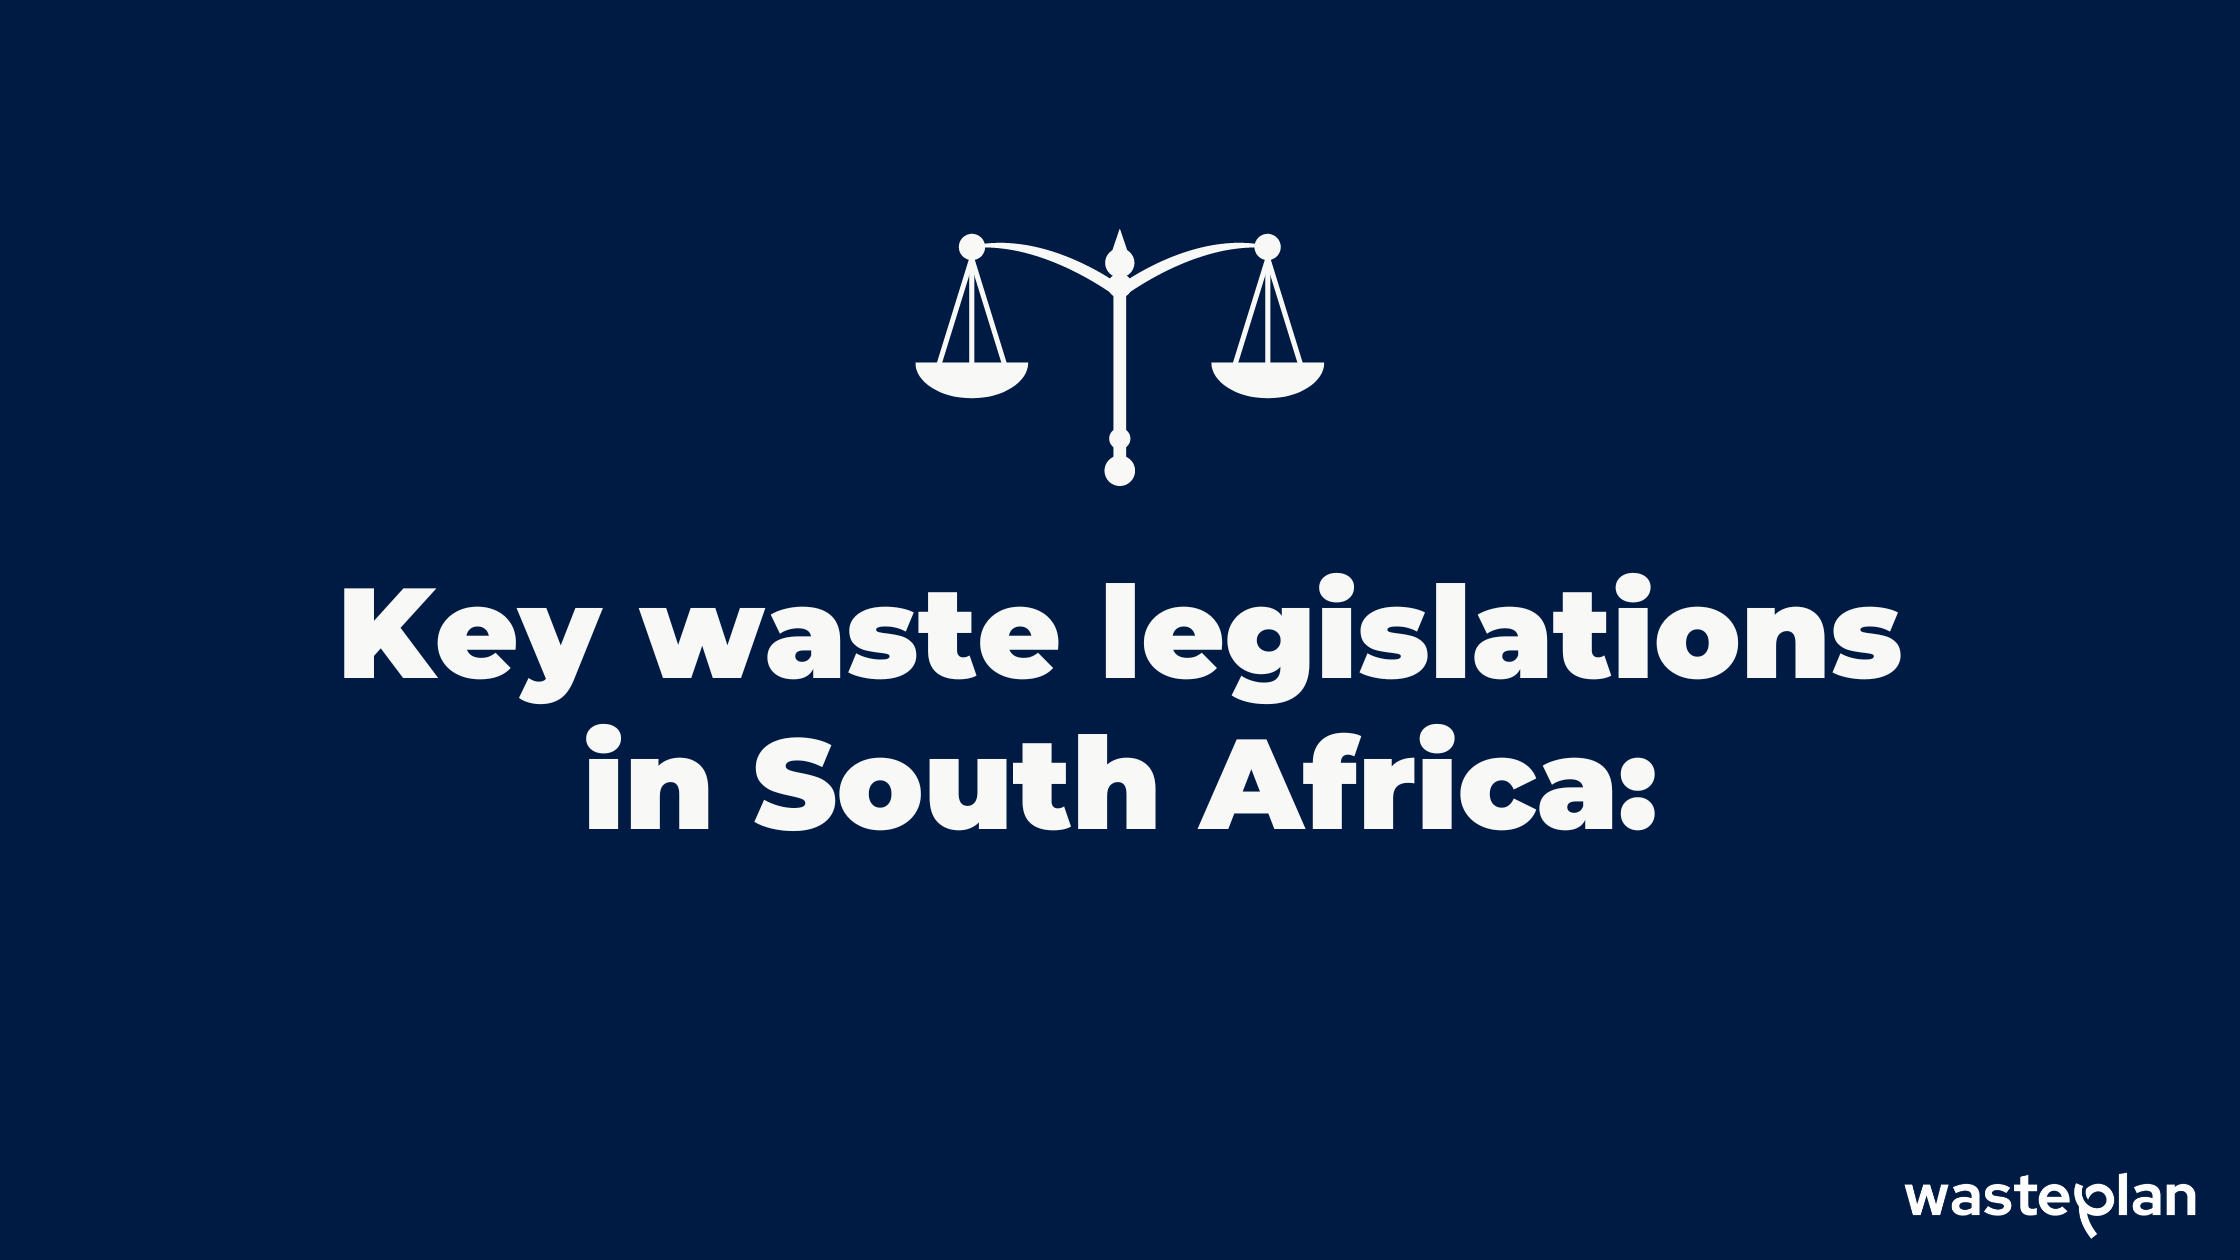 HOW THE TOP 4 WASTE LEGISLATIONS AFFECT YOUR BUSINESS